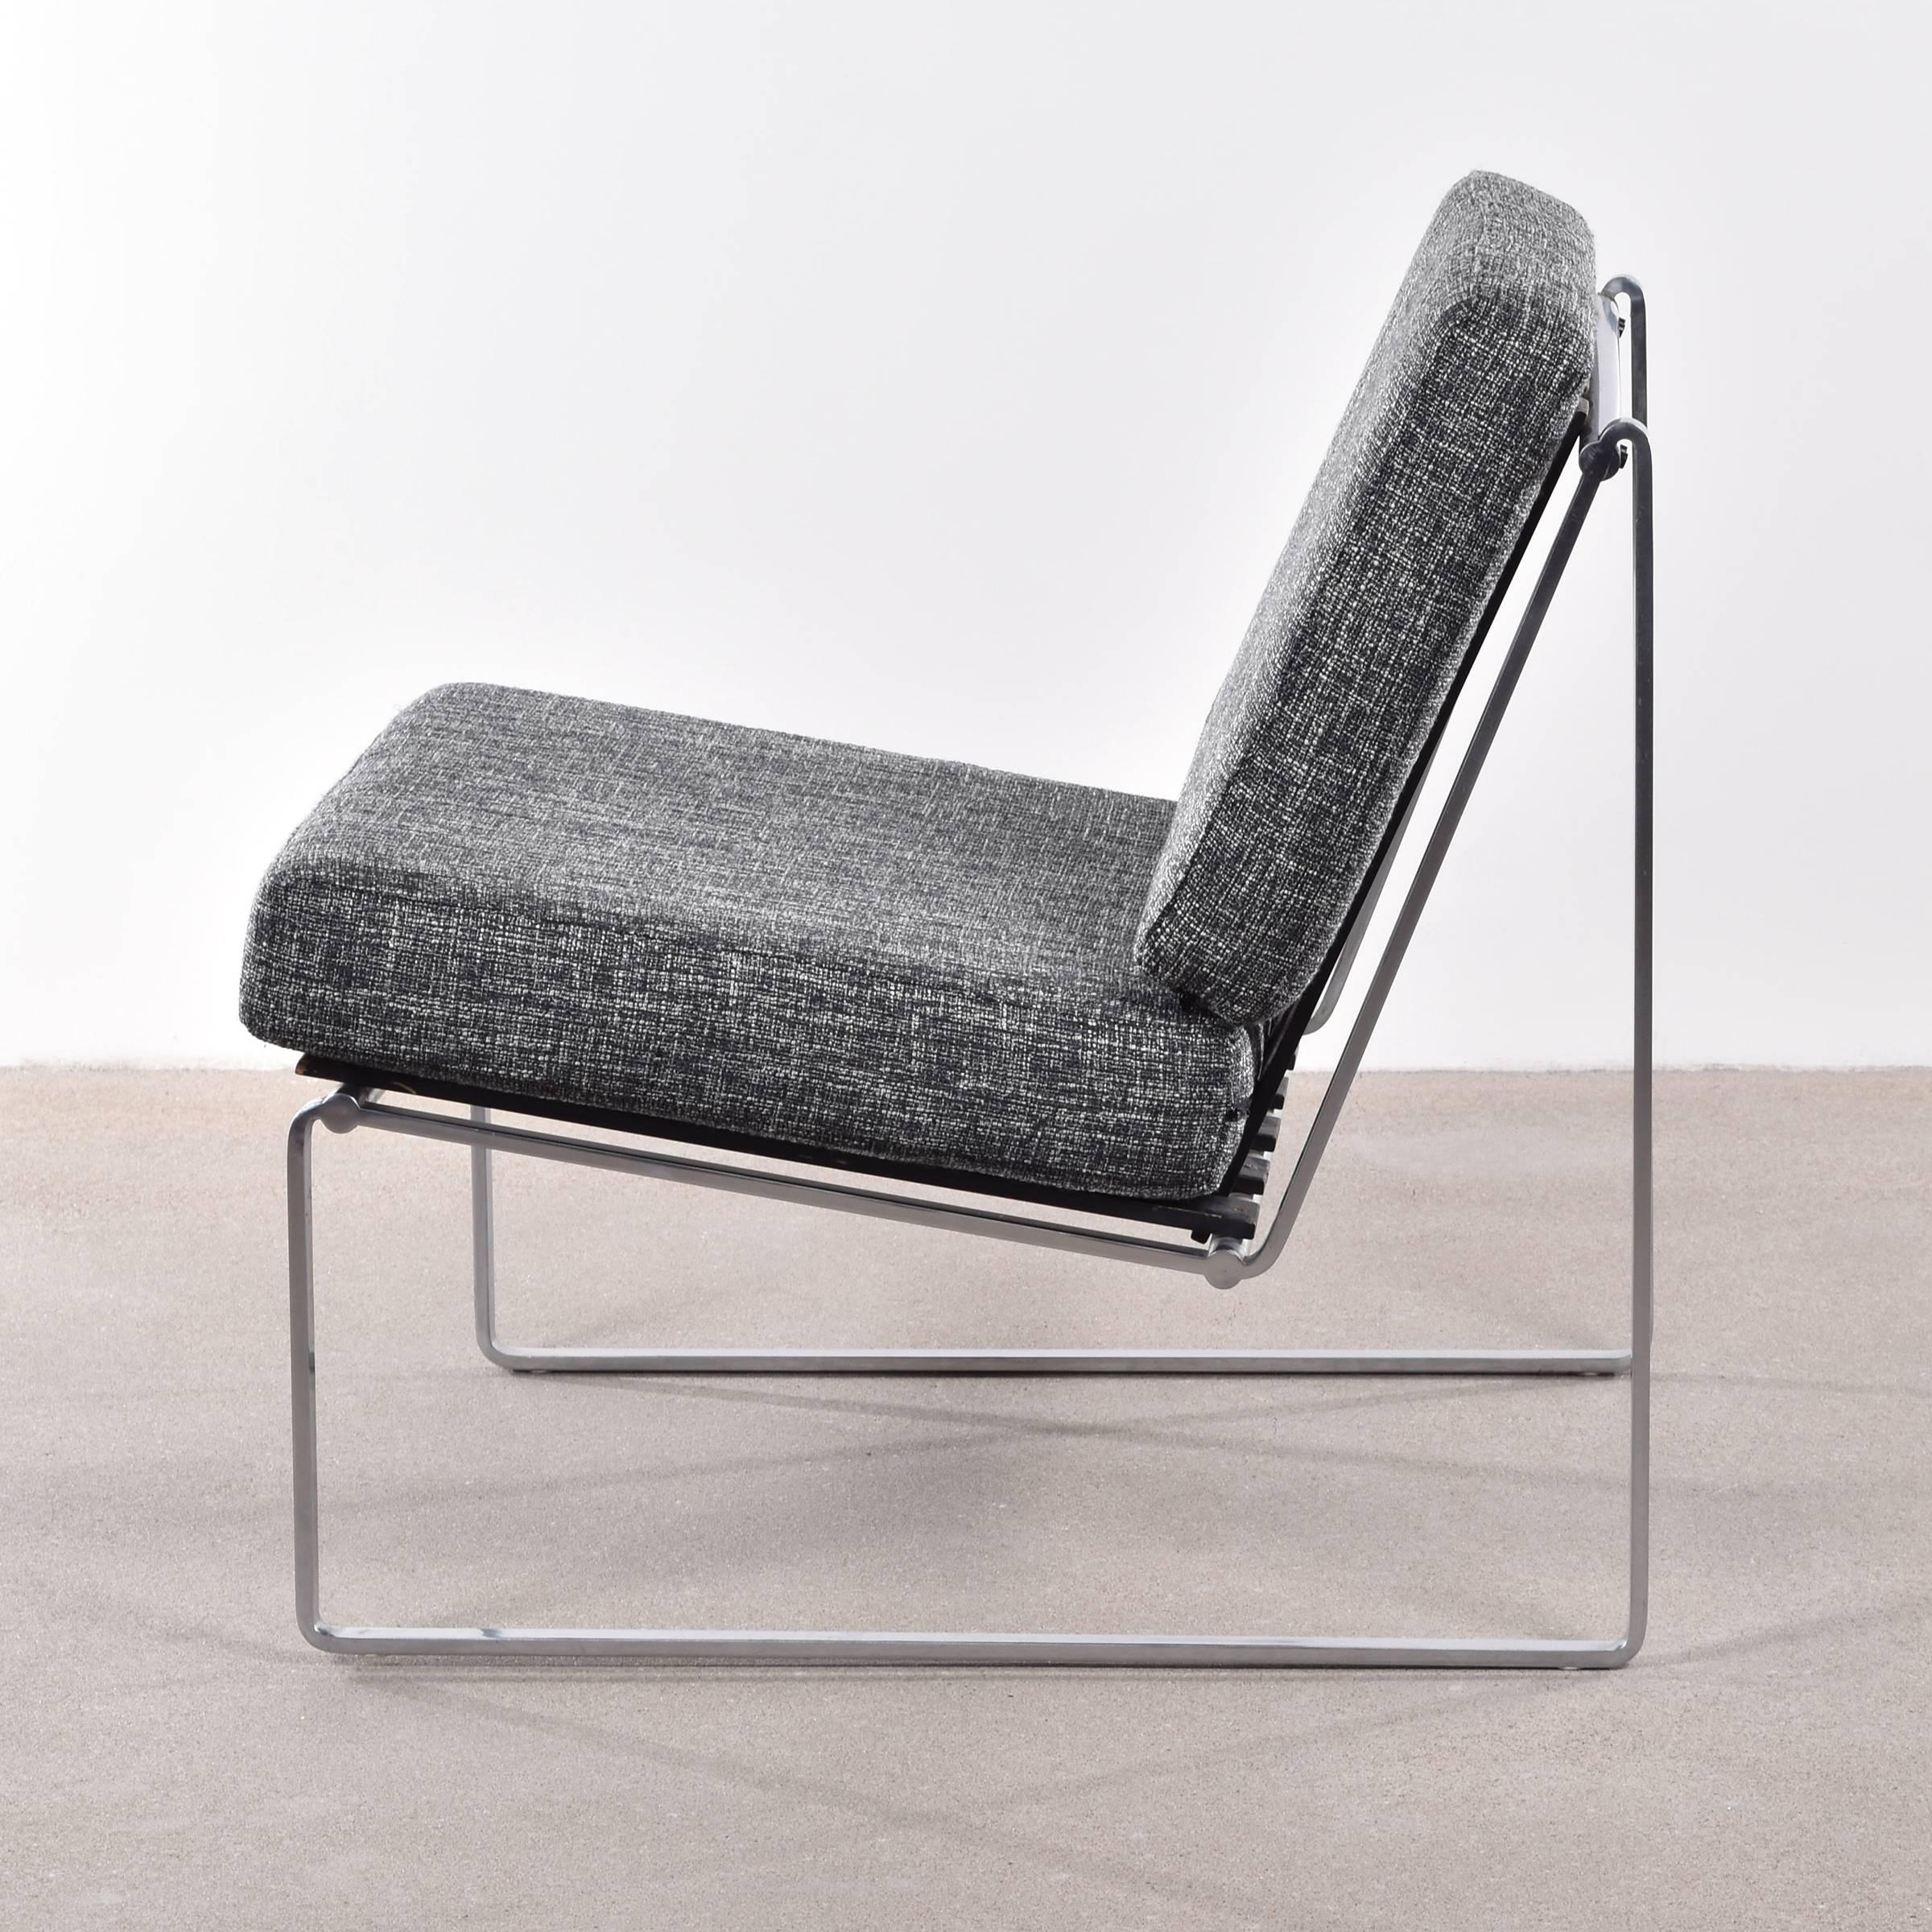 Comfortable modernist lounge chair designed by Kho Liang Ie for Artifort, Netherlands. Solid metal (matte chrome) frame with black lacquered wooden slats. Signed with metal tag Artifort.
Cushions can be newly upholstered if desired, contact us for